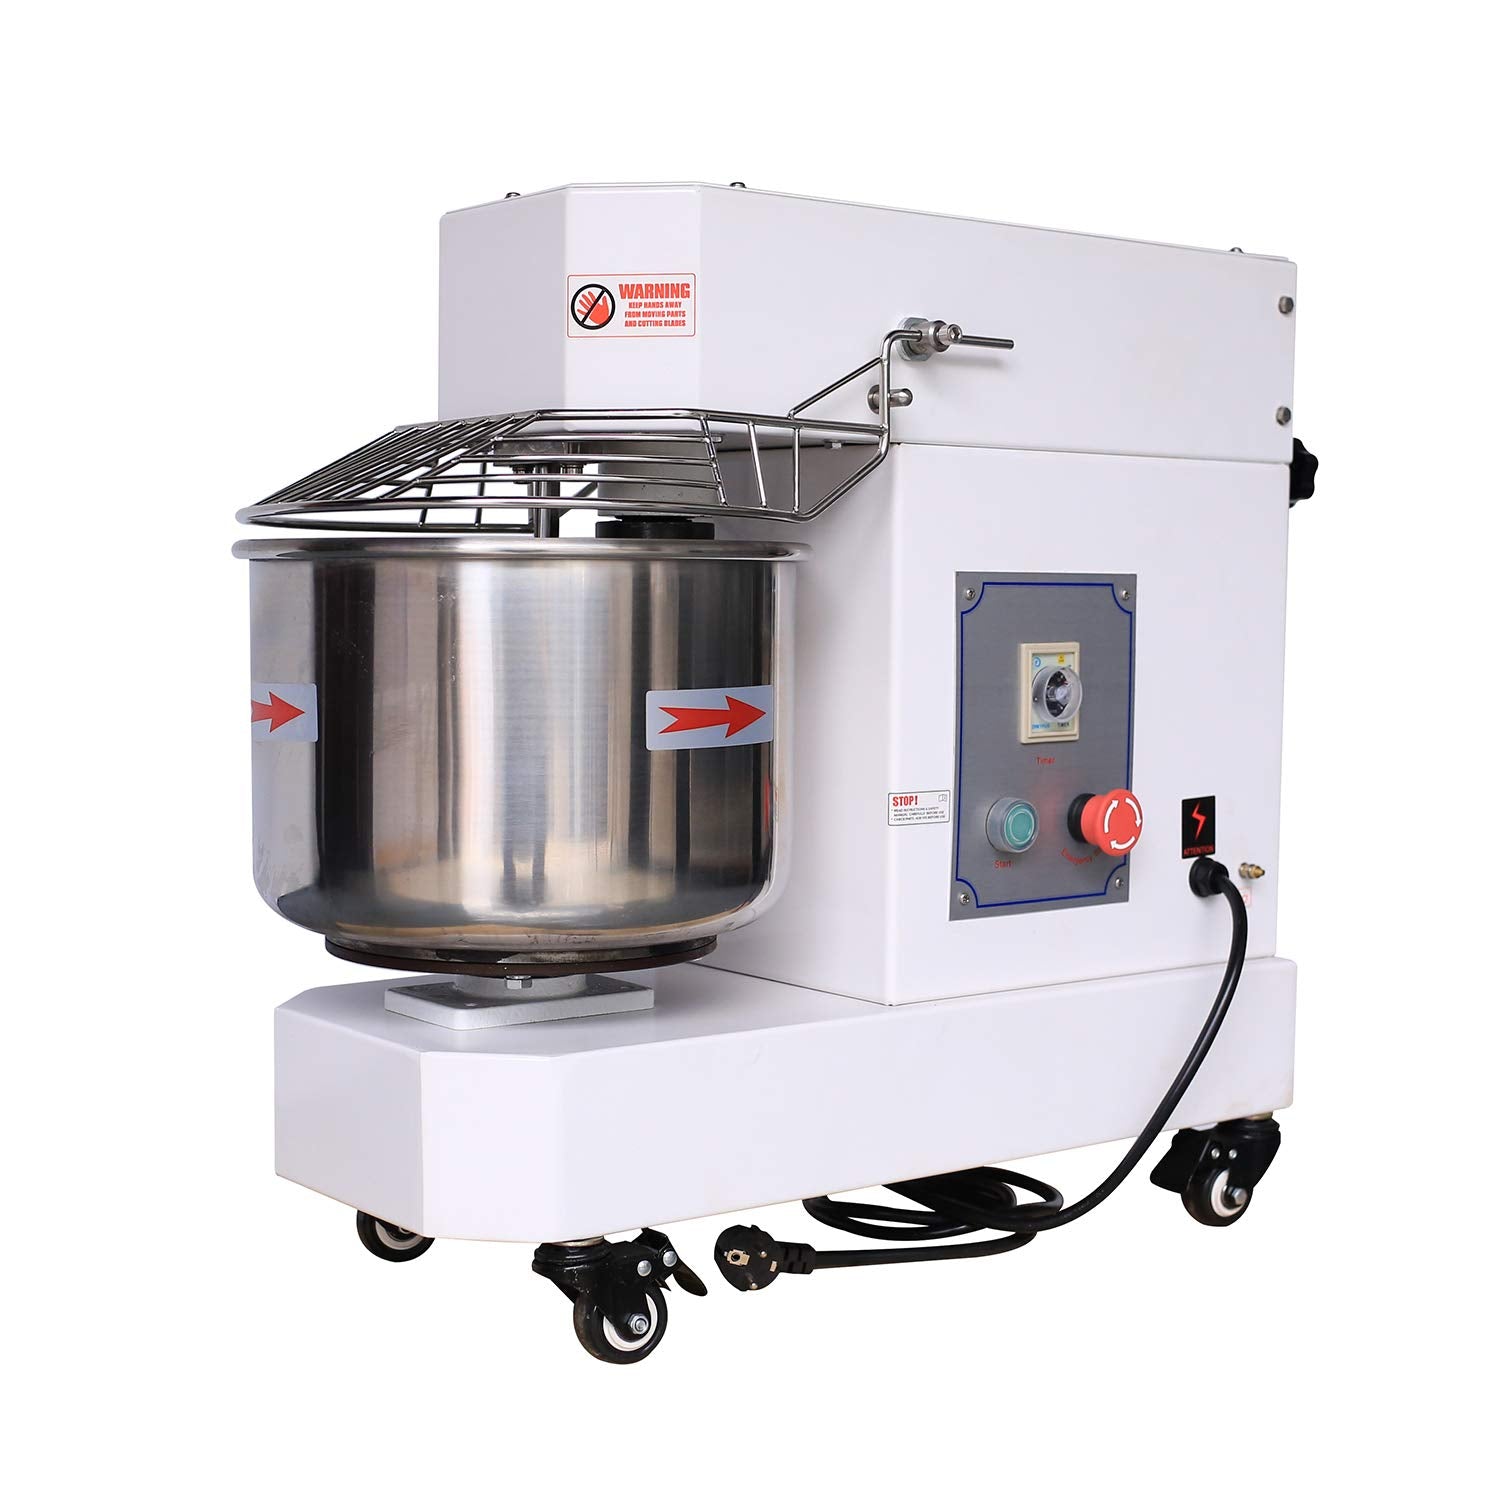 Hakka Commercial Dough Mixer, 20 Qt Spiral Mixer Food Mixer Machine with Food-grade Stainless Steel Bowl, Security Shield & Timer